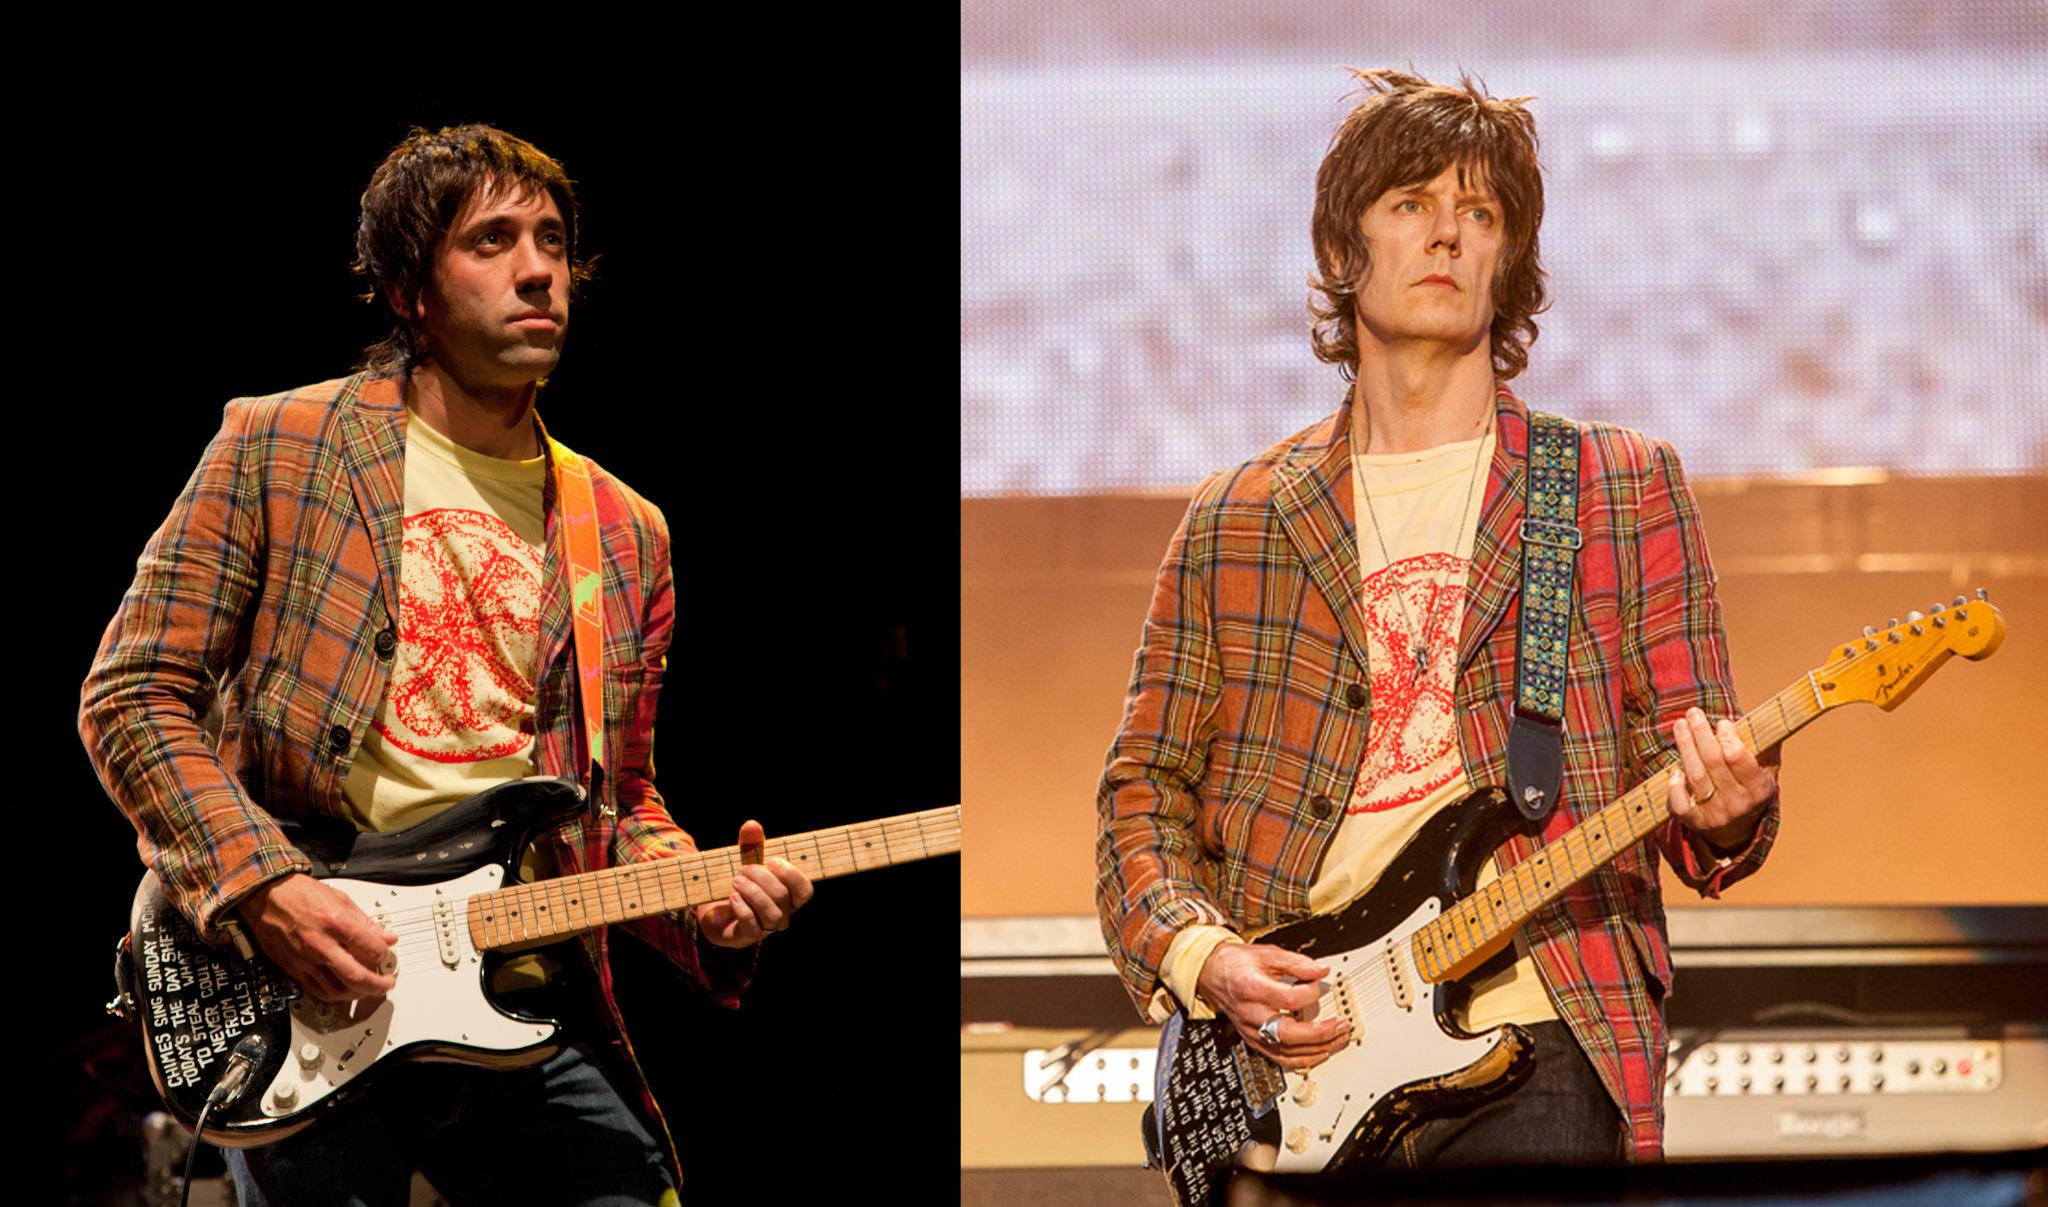 Happy Birthday to the legend that is John Squire! Heres a pic of our not a bad effort on authenticity ! 